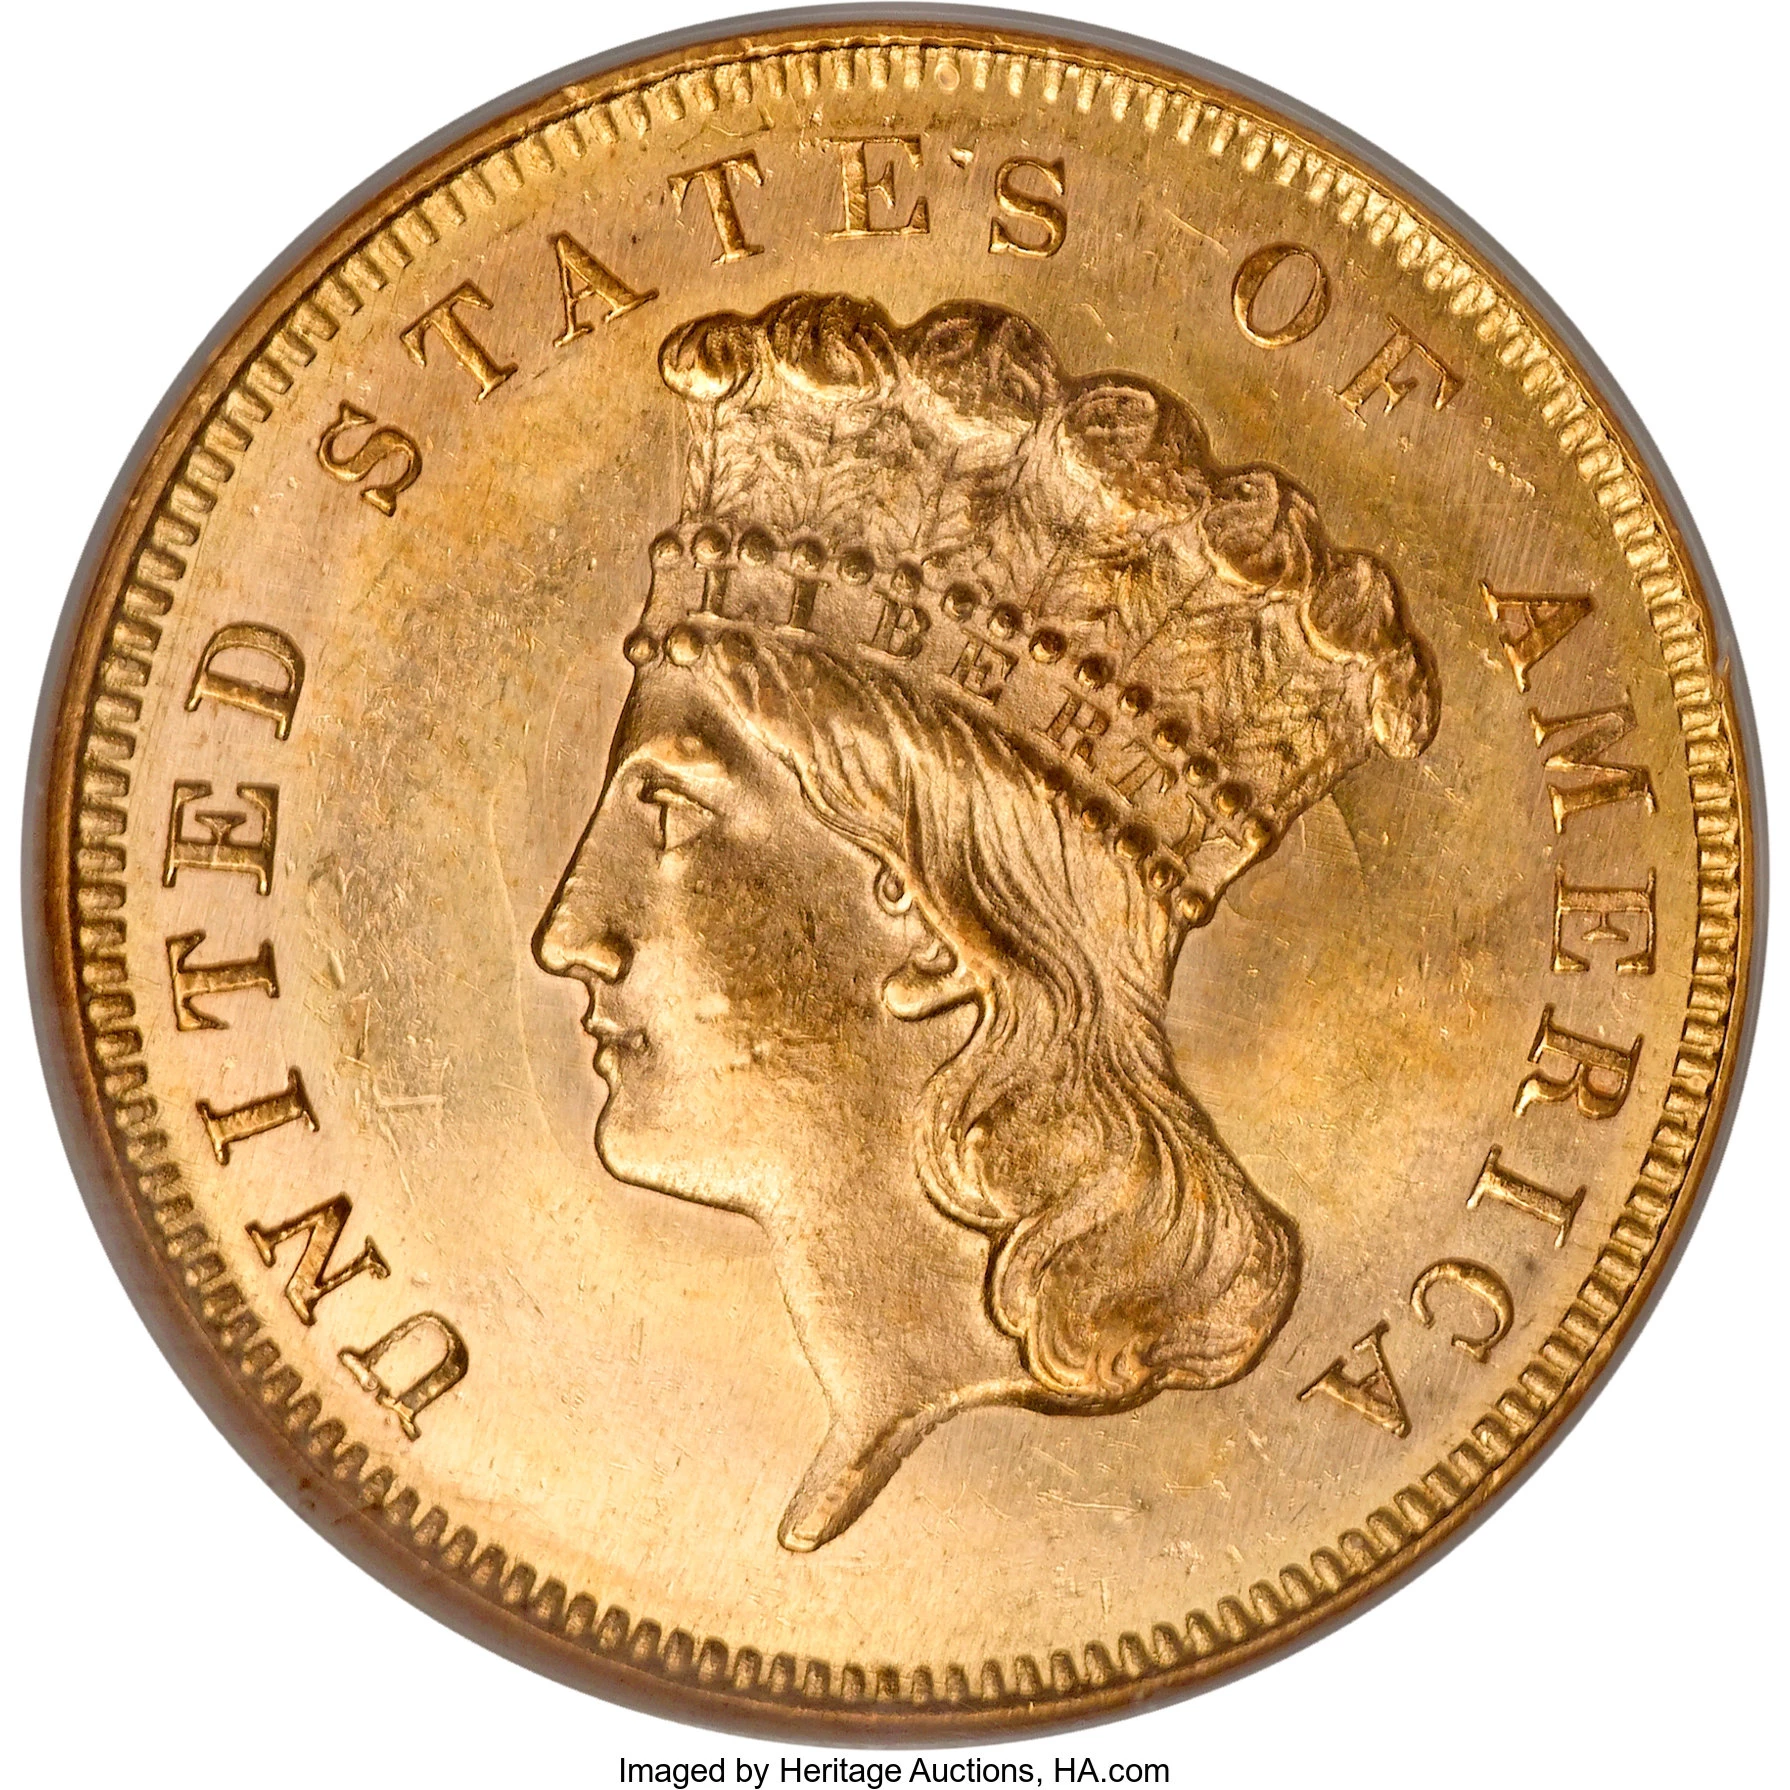 1870 Indian Princess Head Gold $3 Three Dollar Piece - Early Gold Coins  Coin Value Prices, Photos & Info